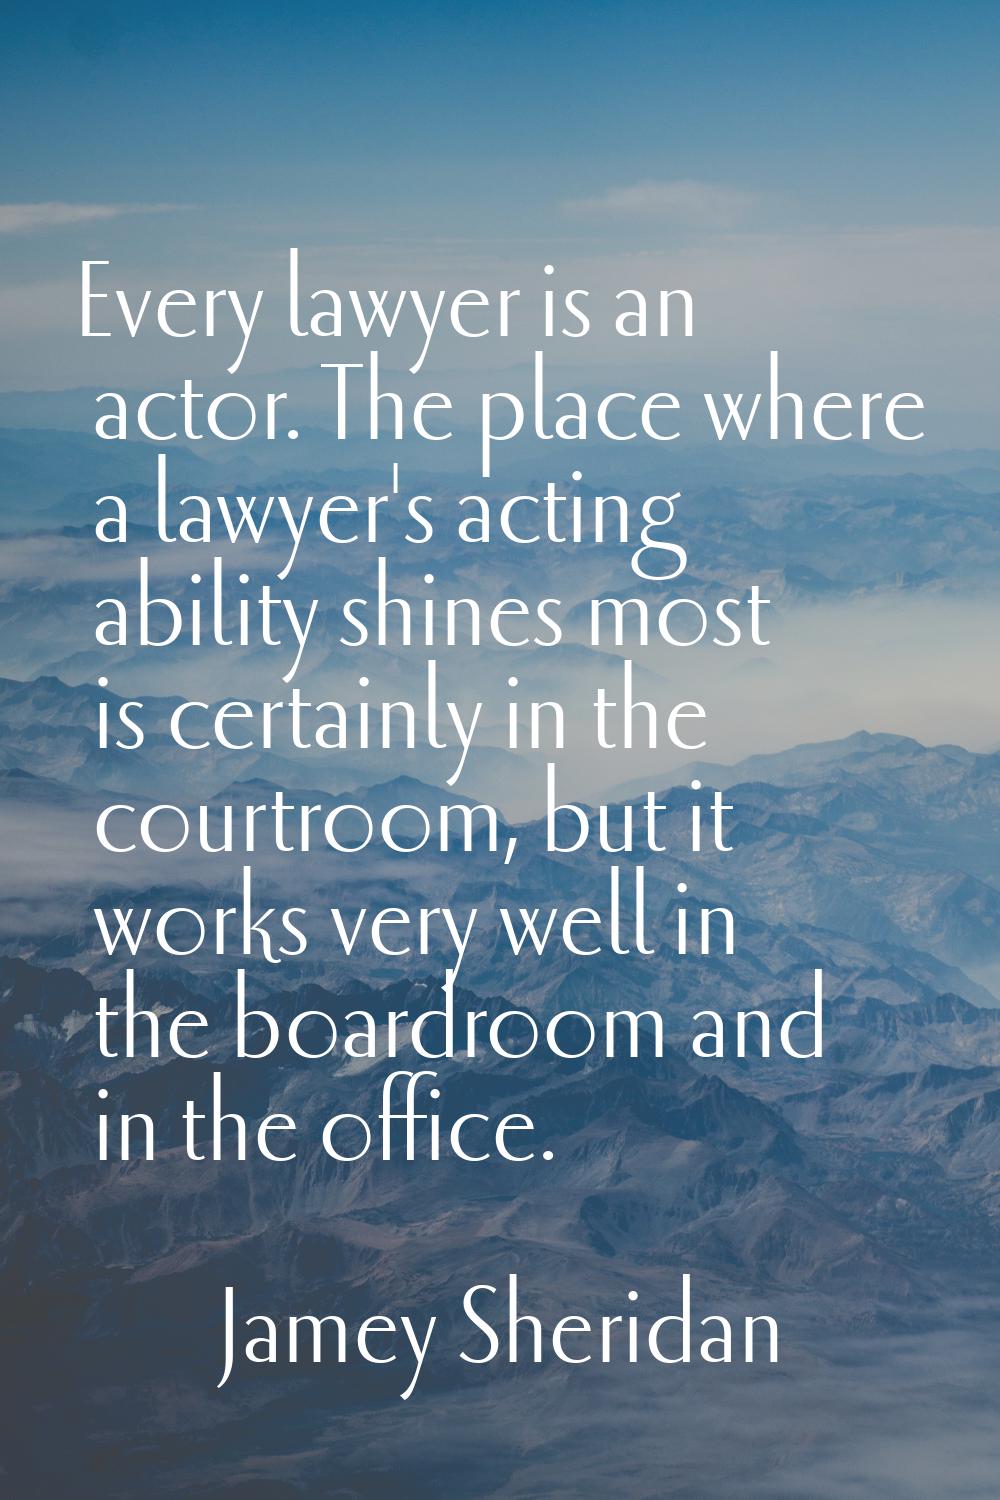 Every lawyer is an actor. The place where a lawyer's acting ability shines most is certainly in the